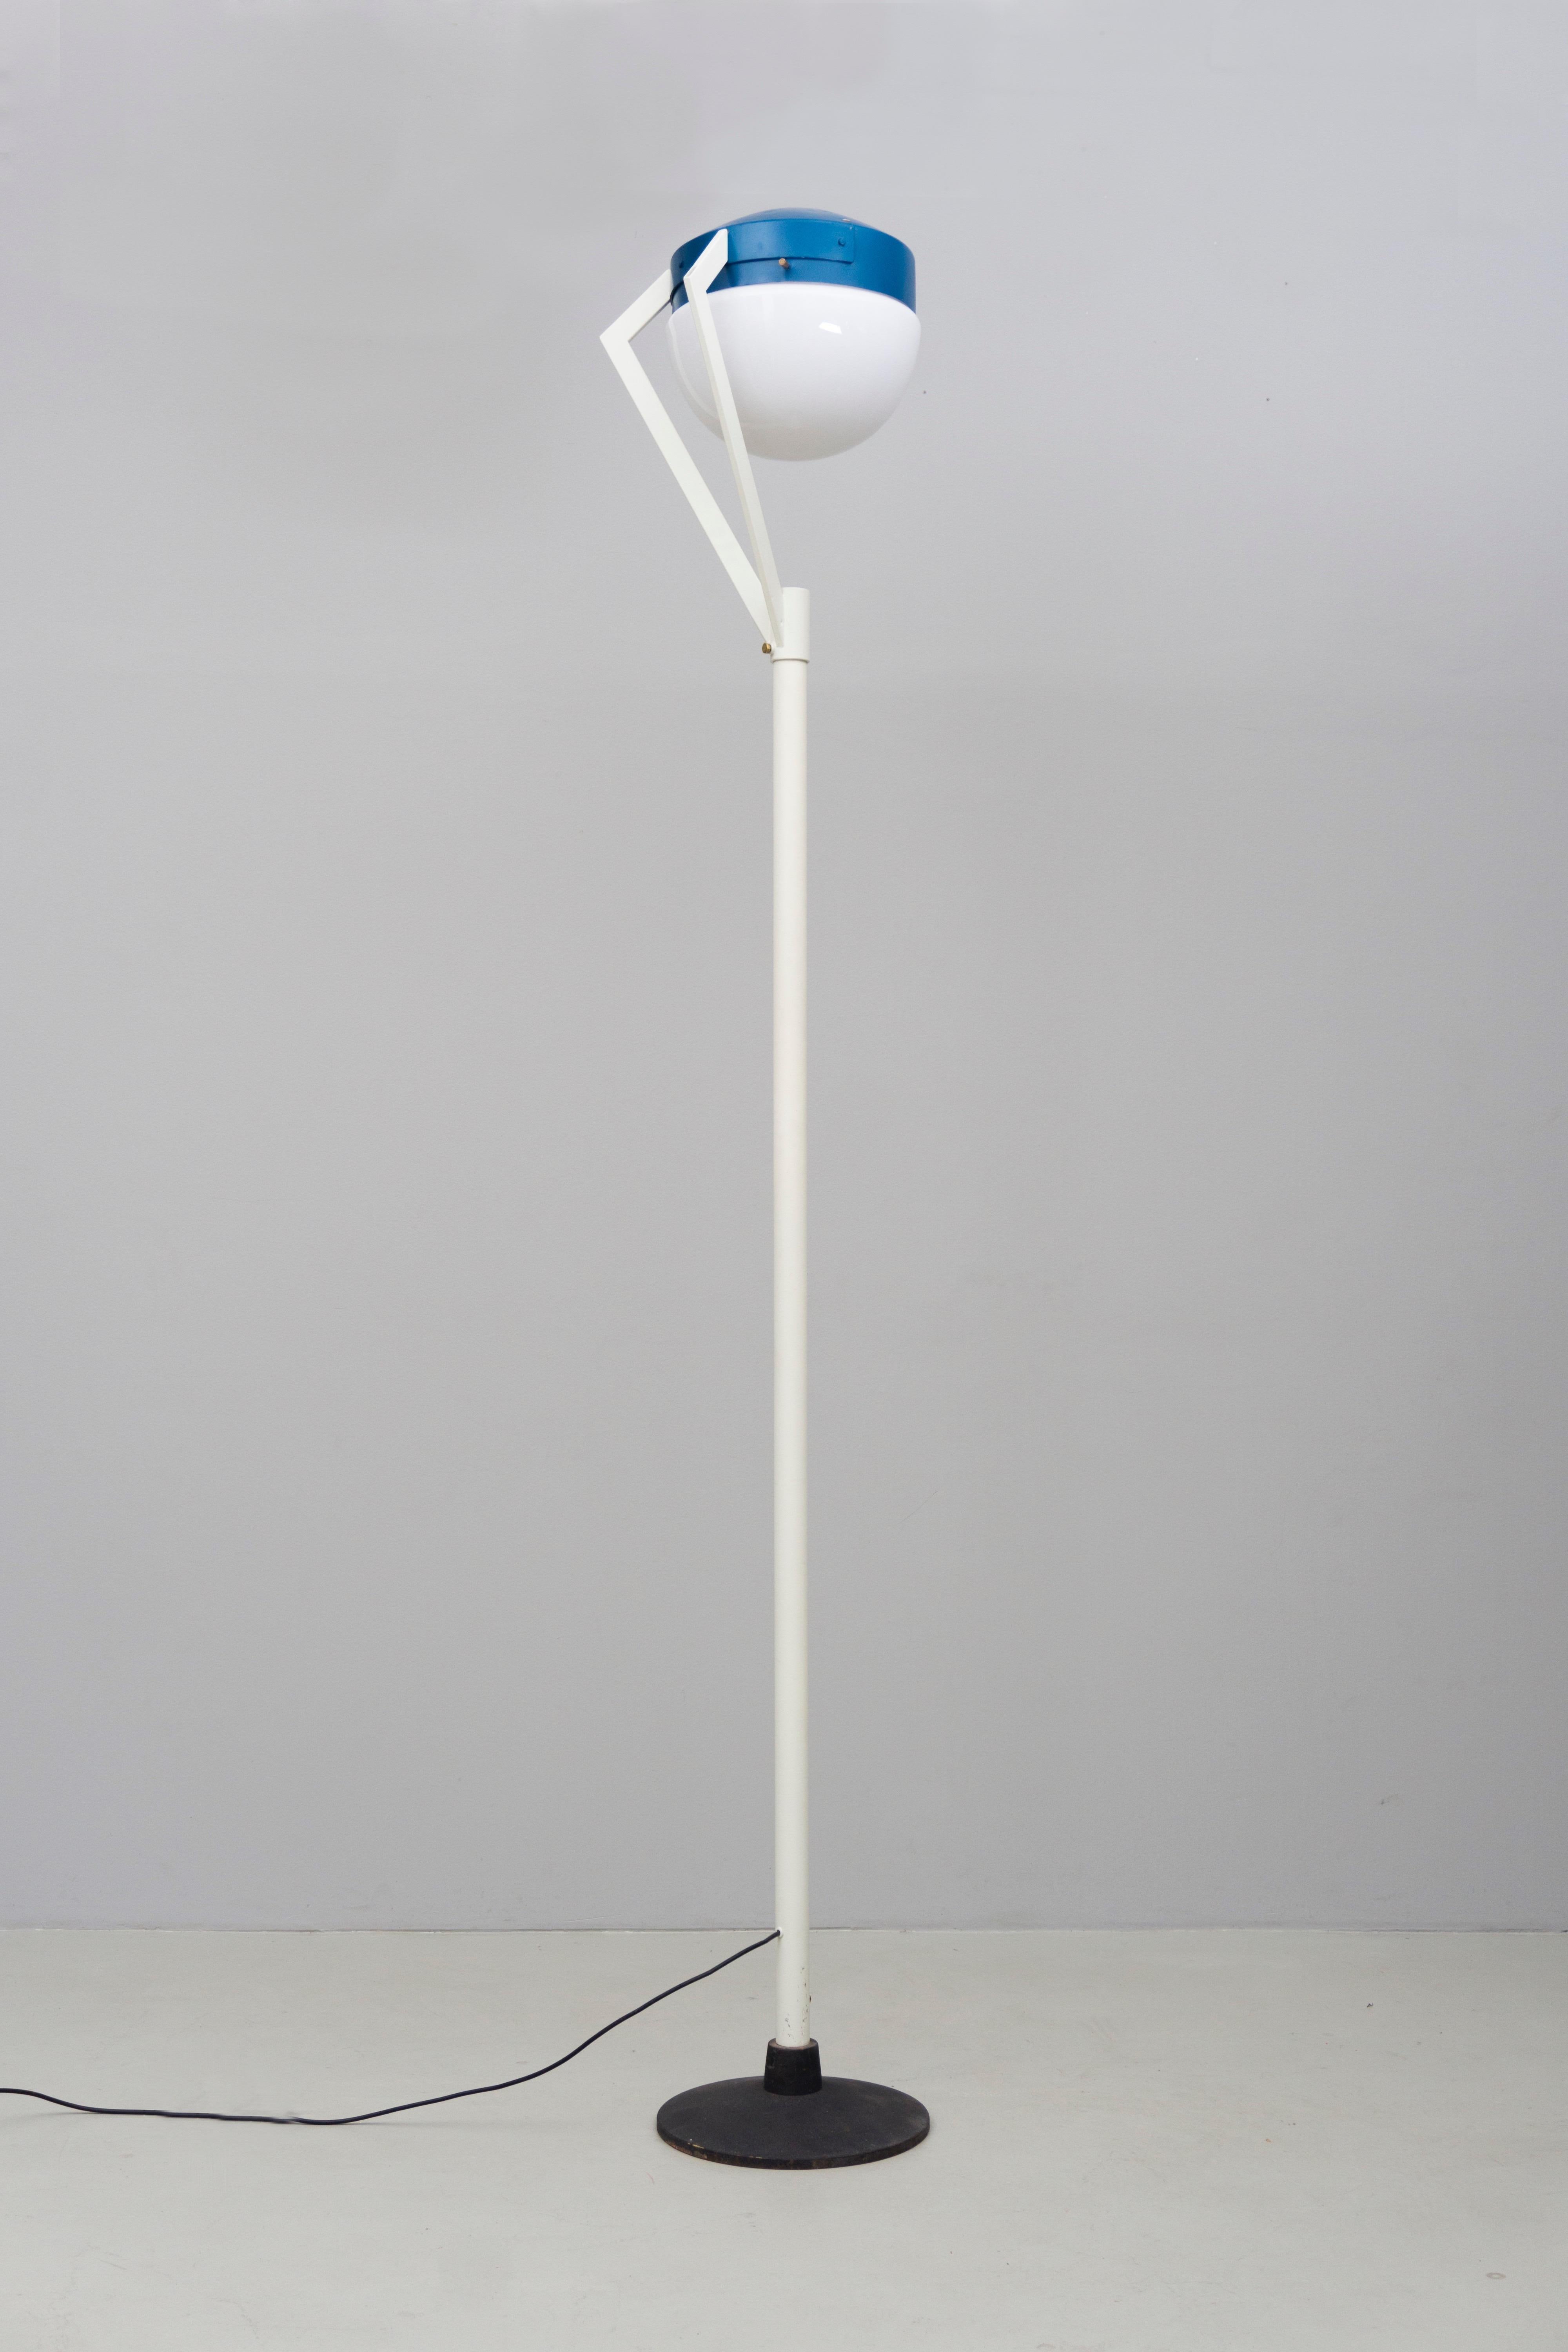 Eccentric floor lamp by Bruno Gatta, made of metal, lacquered in blue and white, blue reflector and white round opaline glass. Labeled Stilnovo.

Two pieces available, price is for one.


Bruno Gatta (1904) was born in to a family of Industrial